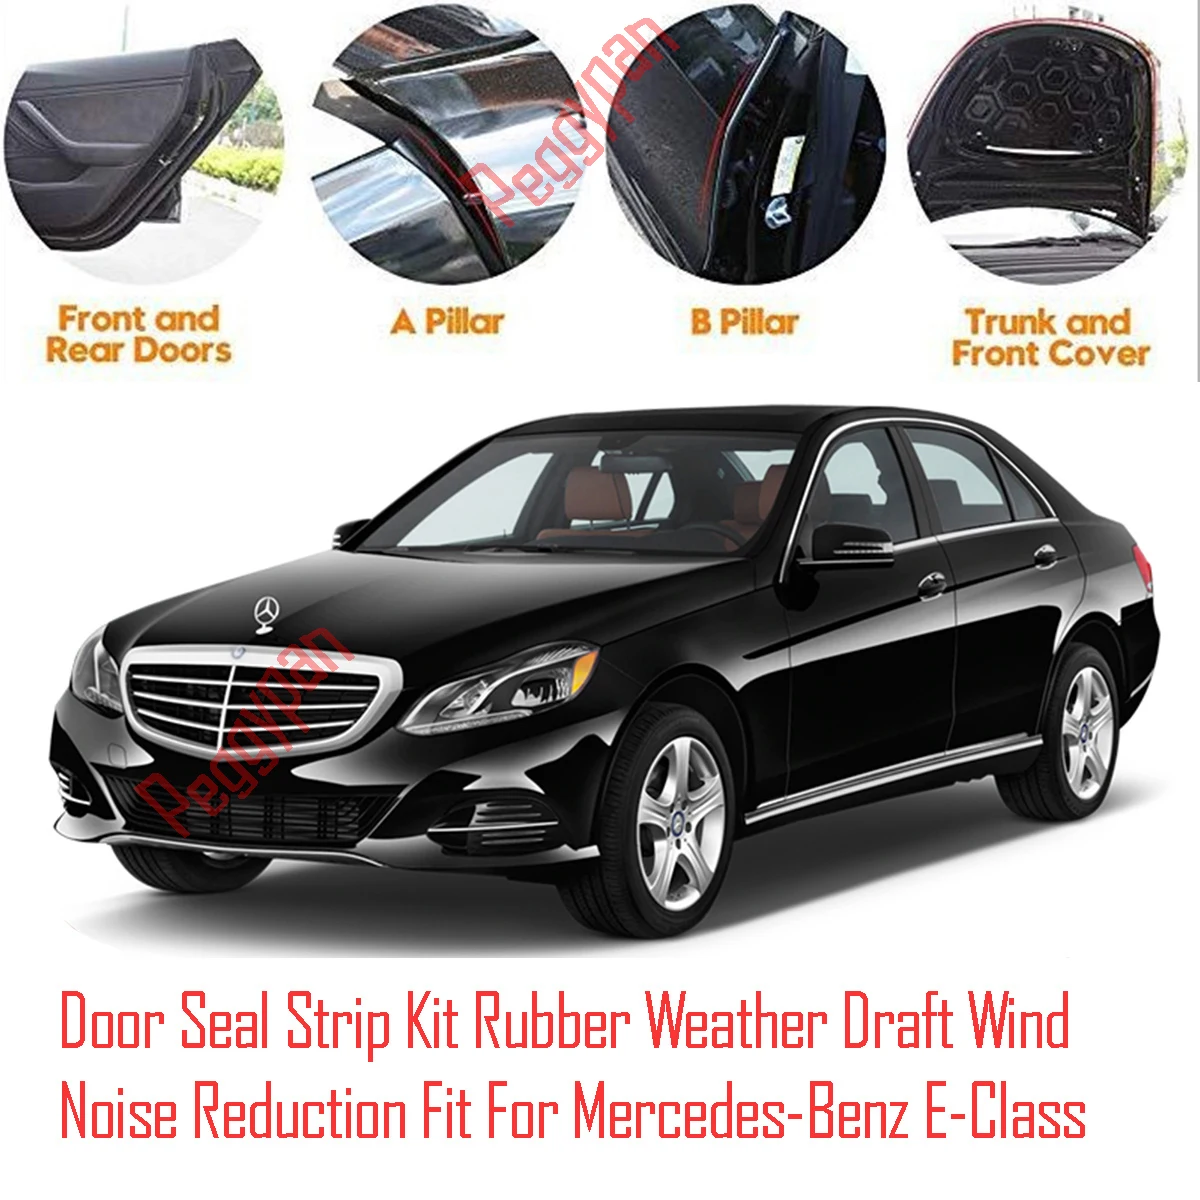 Door Seal Strip Kit Self Adhesive Window Engine Cover Soundproof Rubber Weather Draft Wind Noise Reduction For Mercedes  E-Class